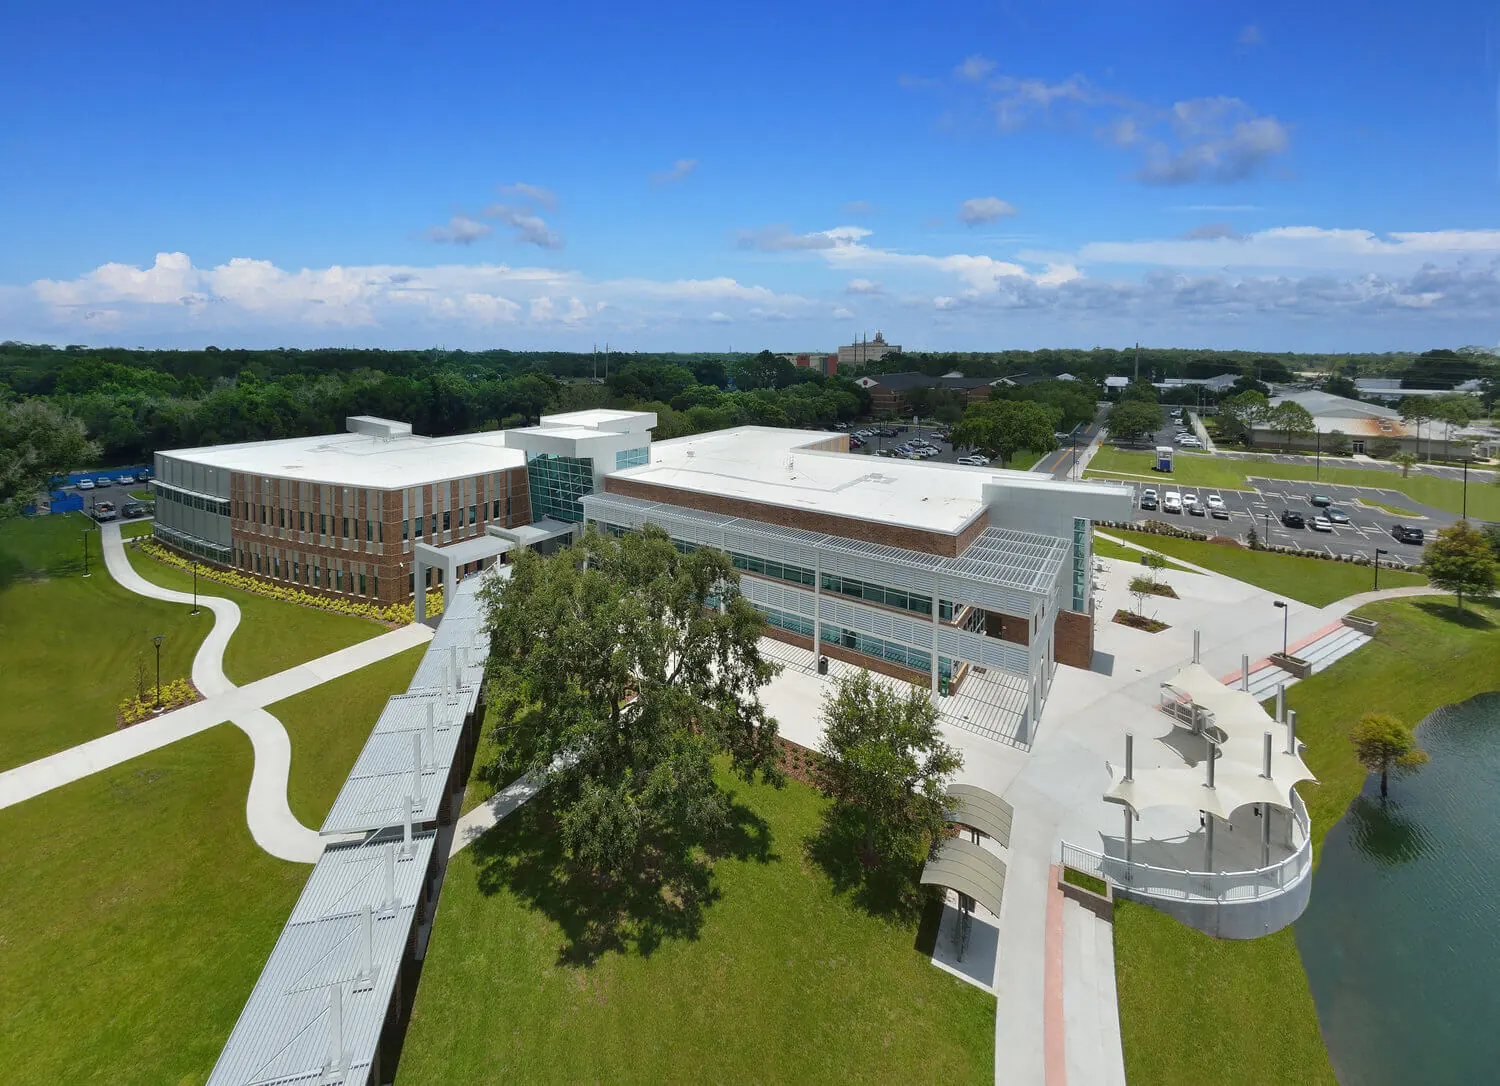 Seminole State College of Florida Selects YuJa Panorama Digital Accessibility Platform to Provide Accessible Content to More Than 25,000 Students